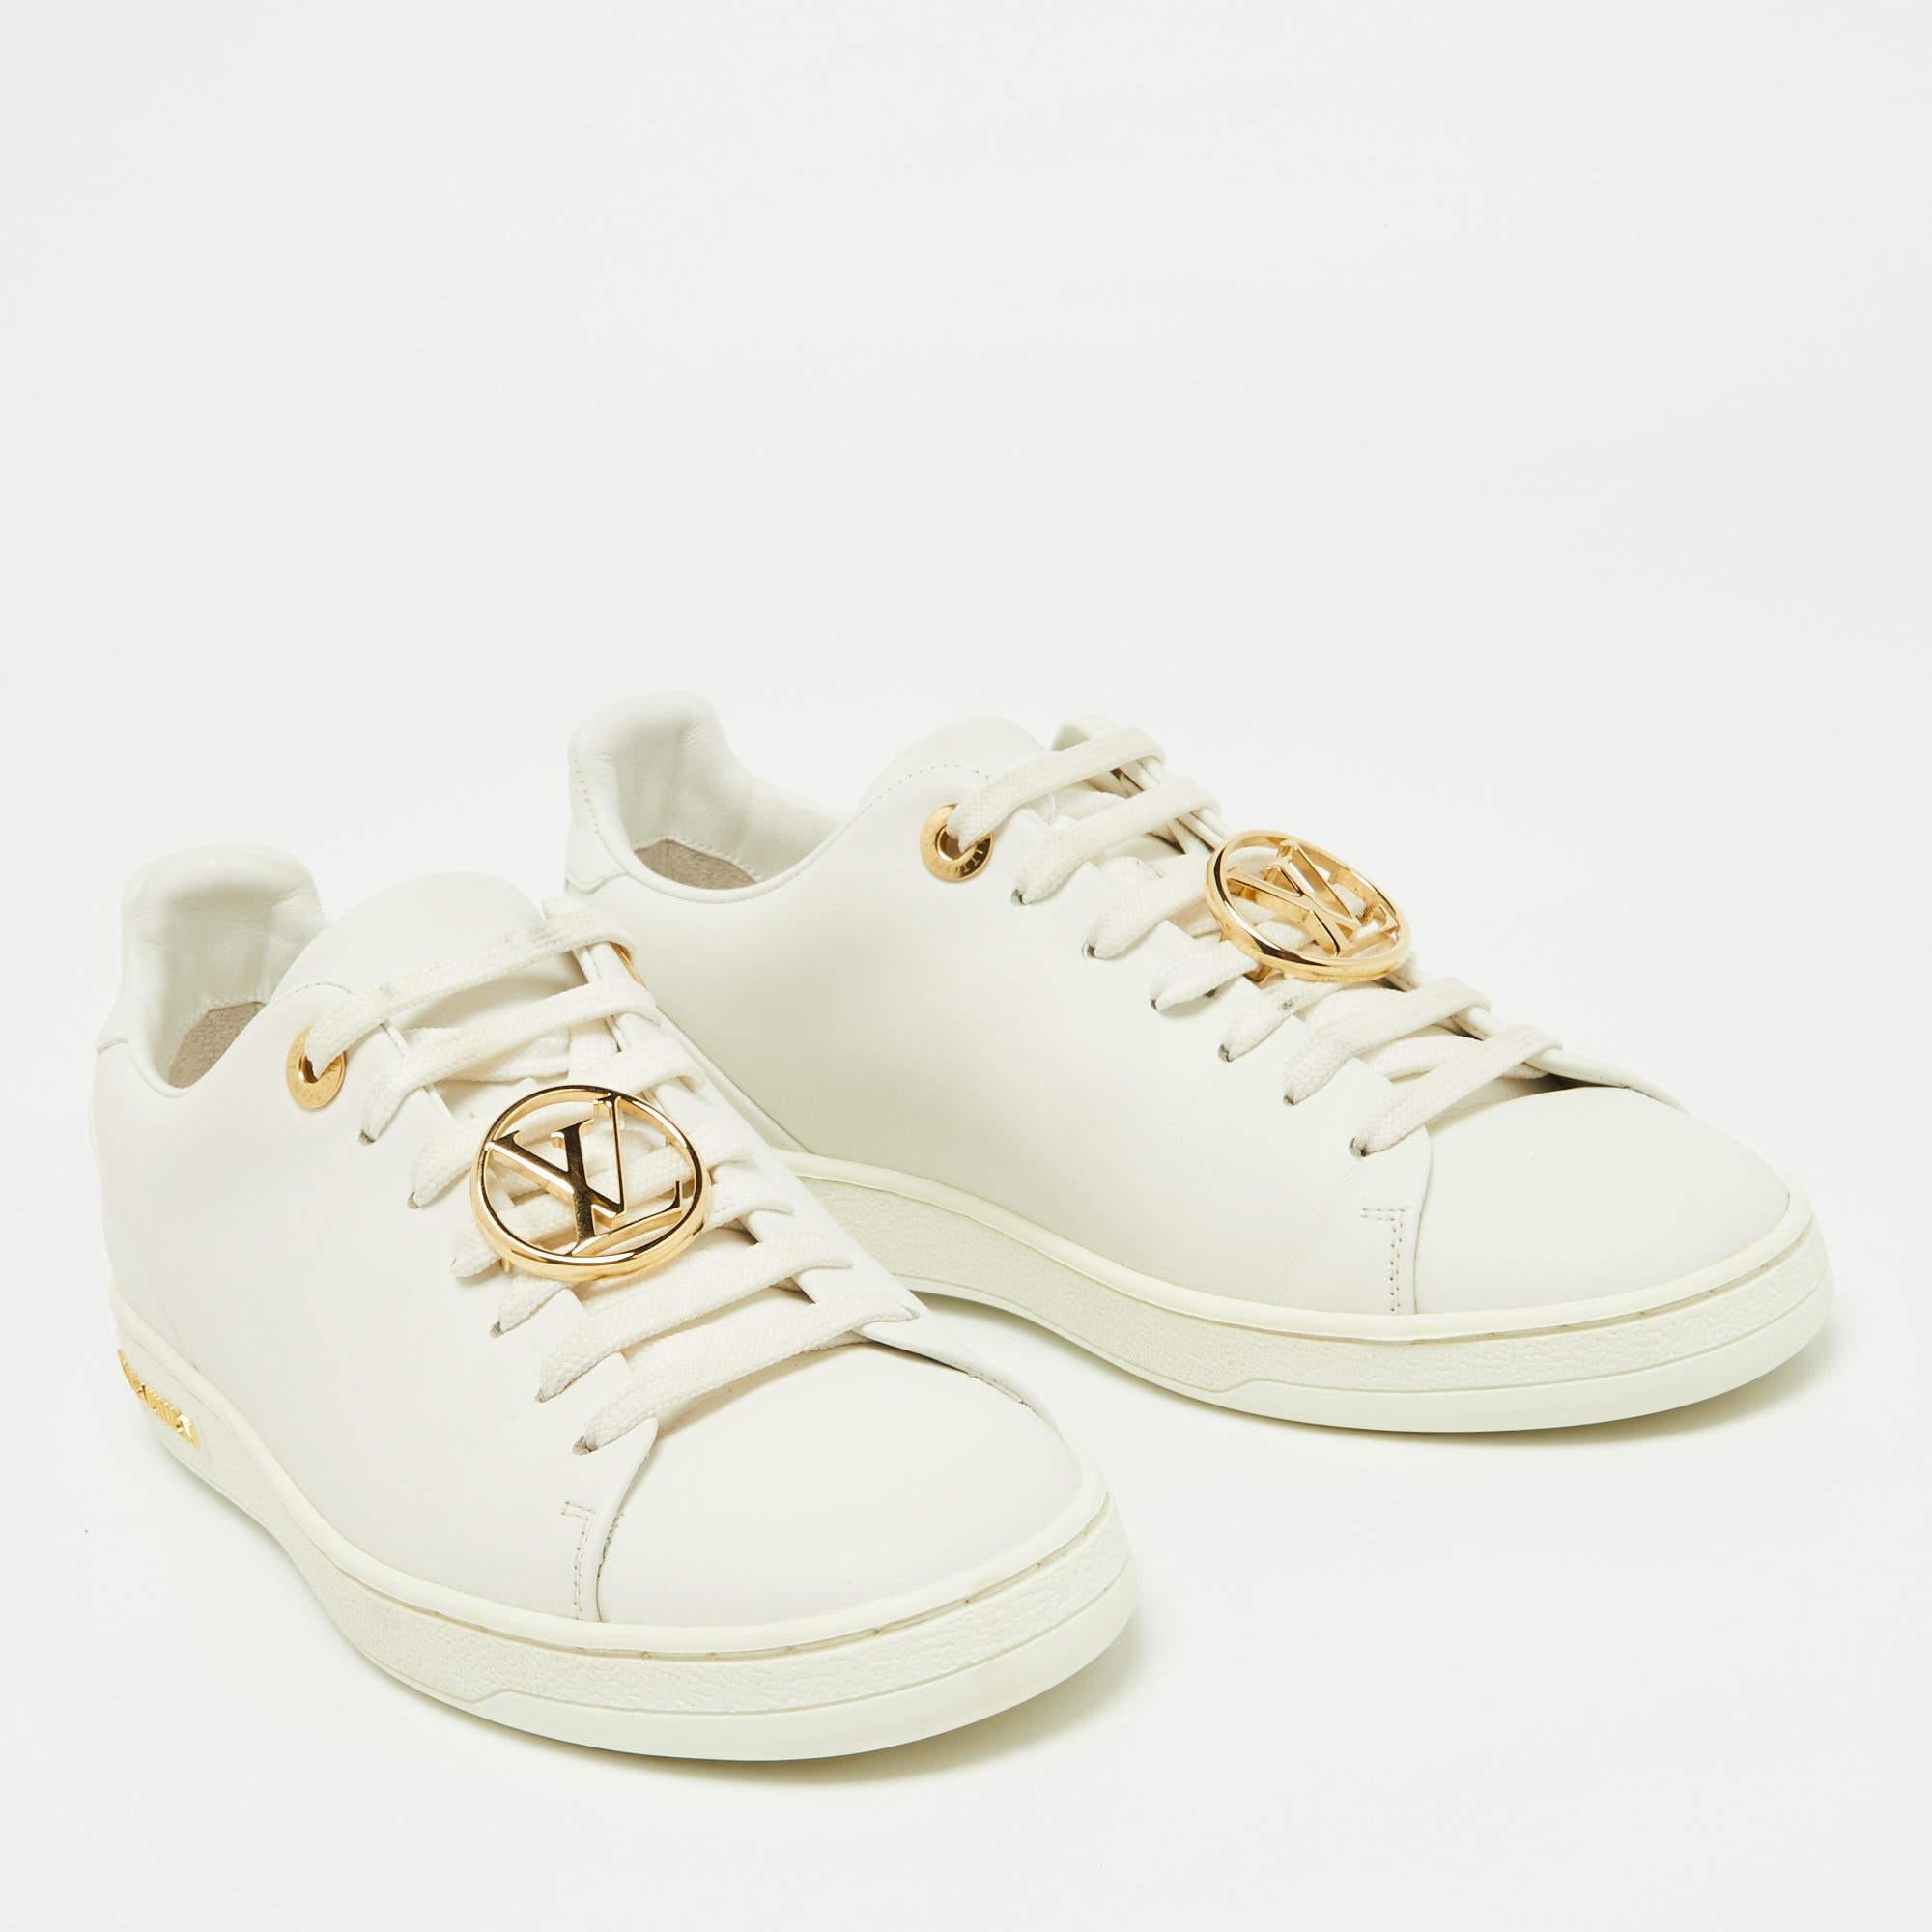 Women's Louis Vuitton White/Gold Leather Frontrow Sneakers Size 36